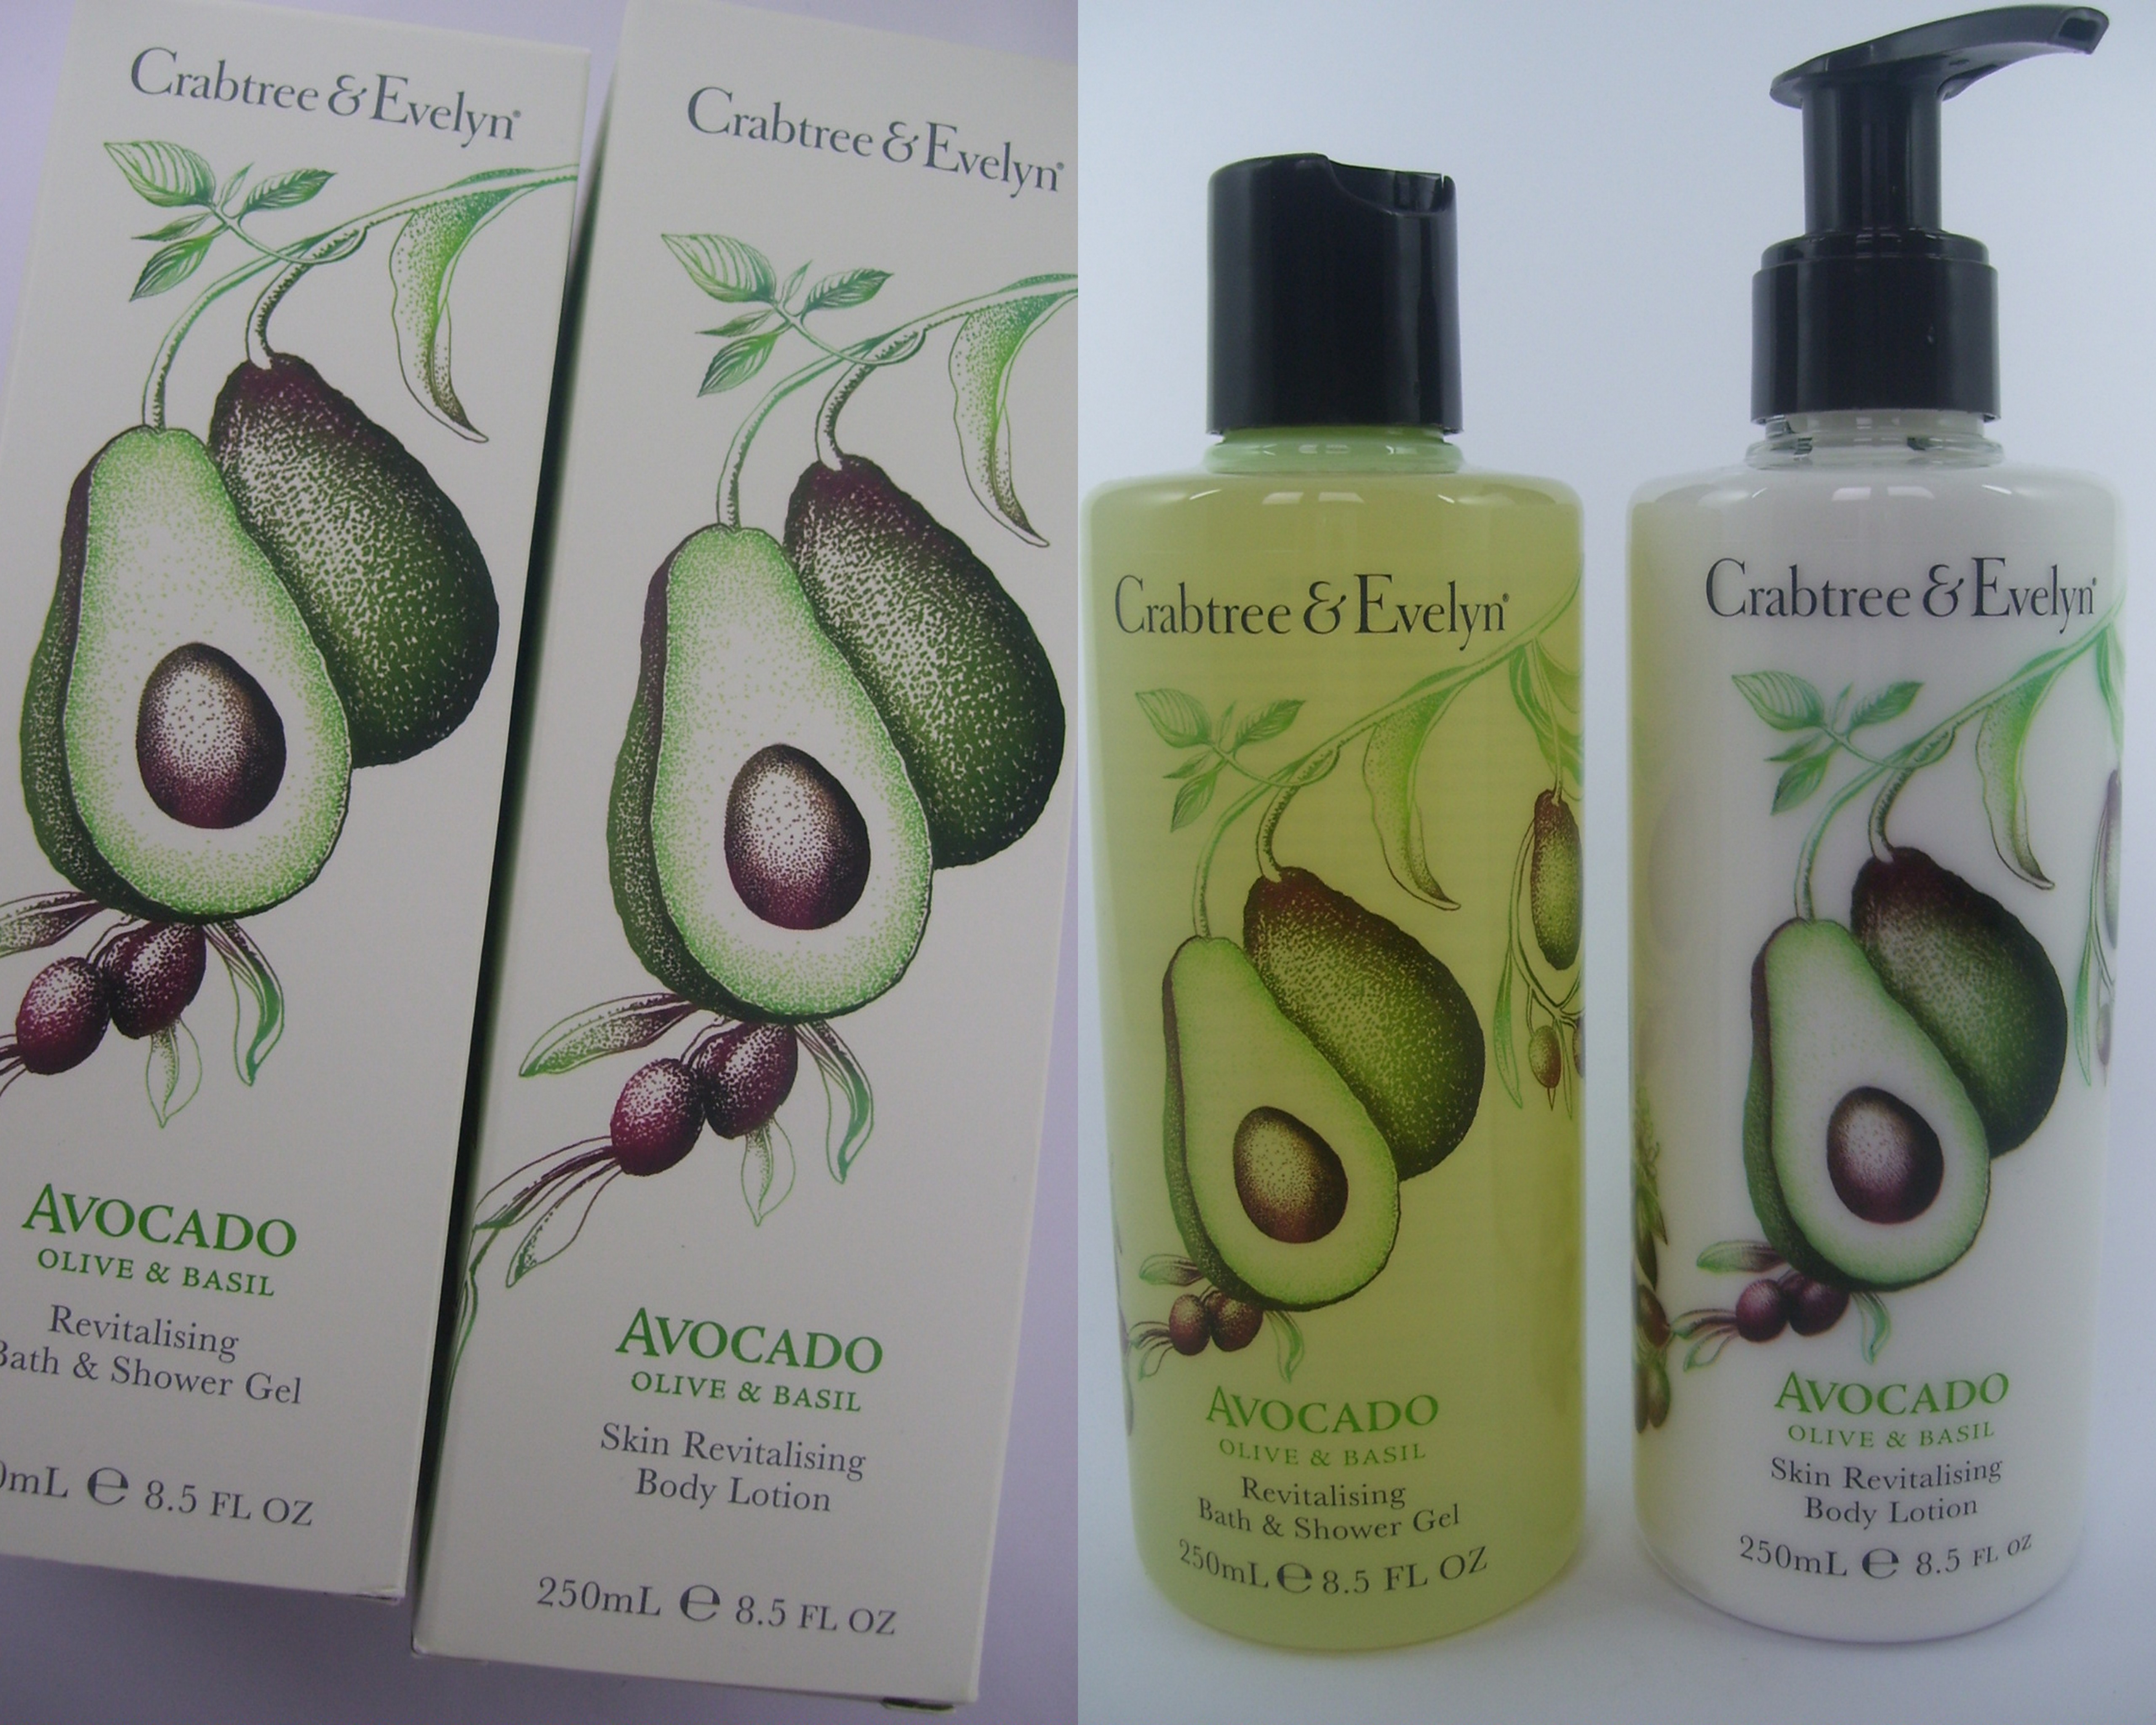 *CLOSED* Review & Giveaway! Crabtree & Evelyn Avocado Olive & Basil Collection